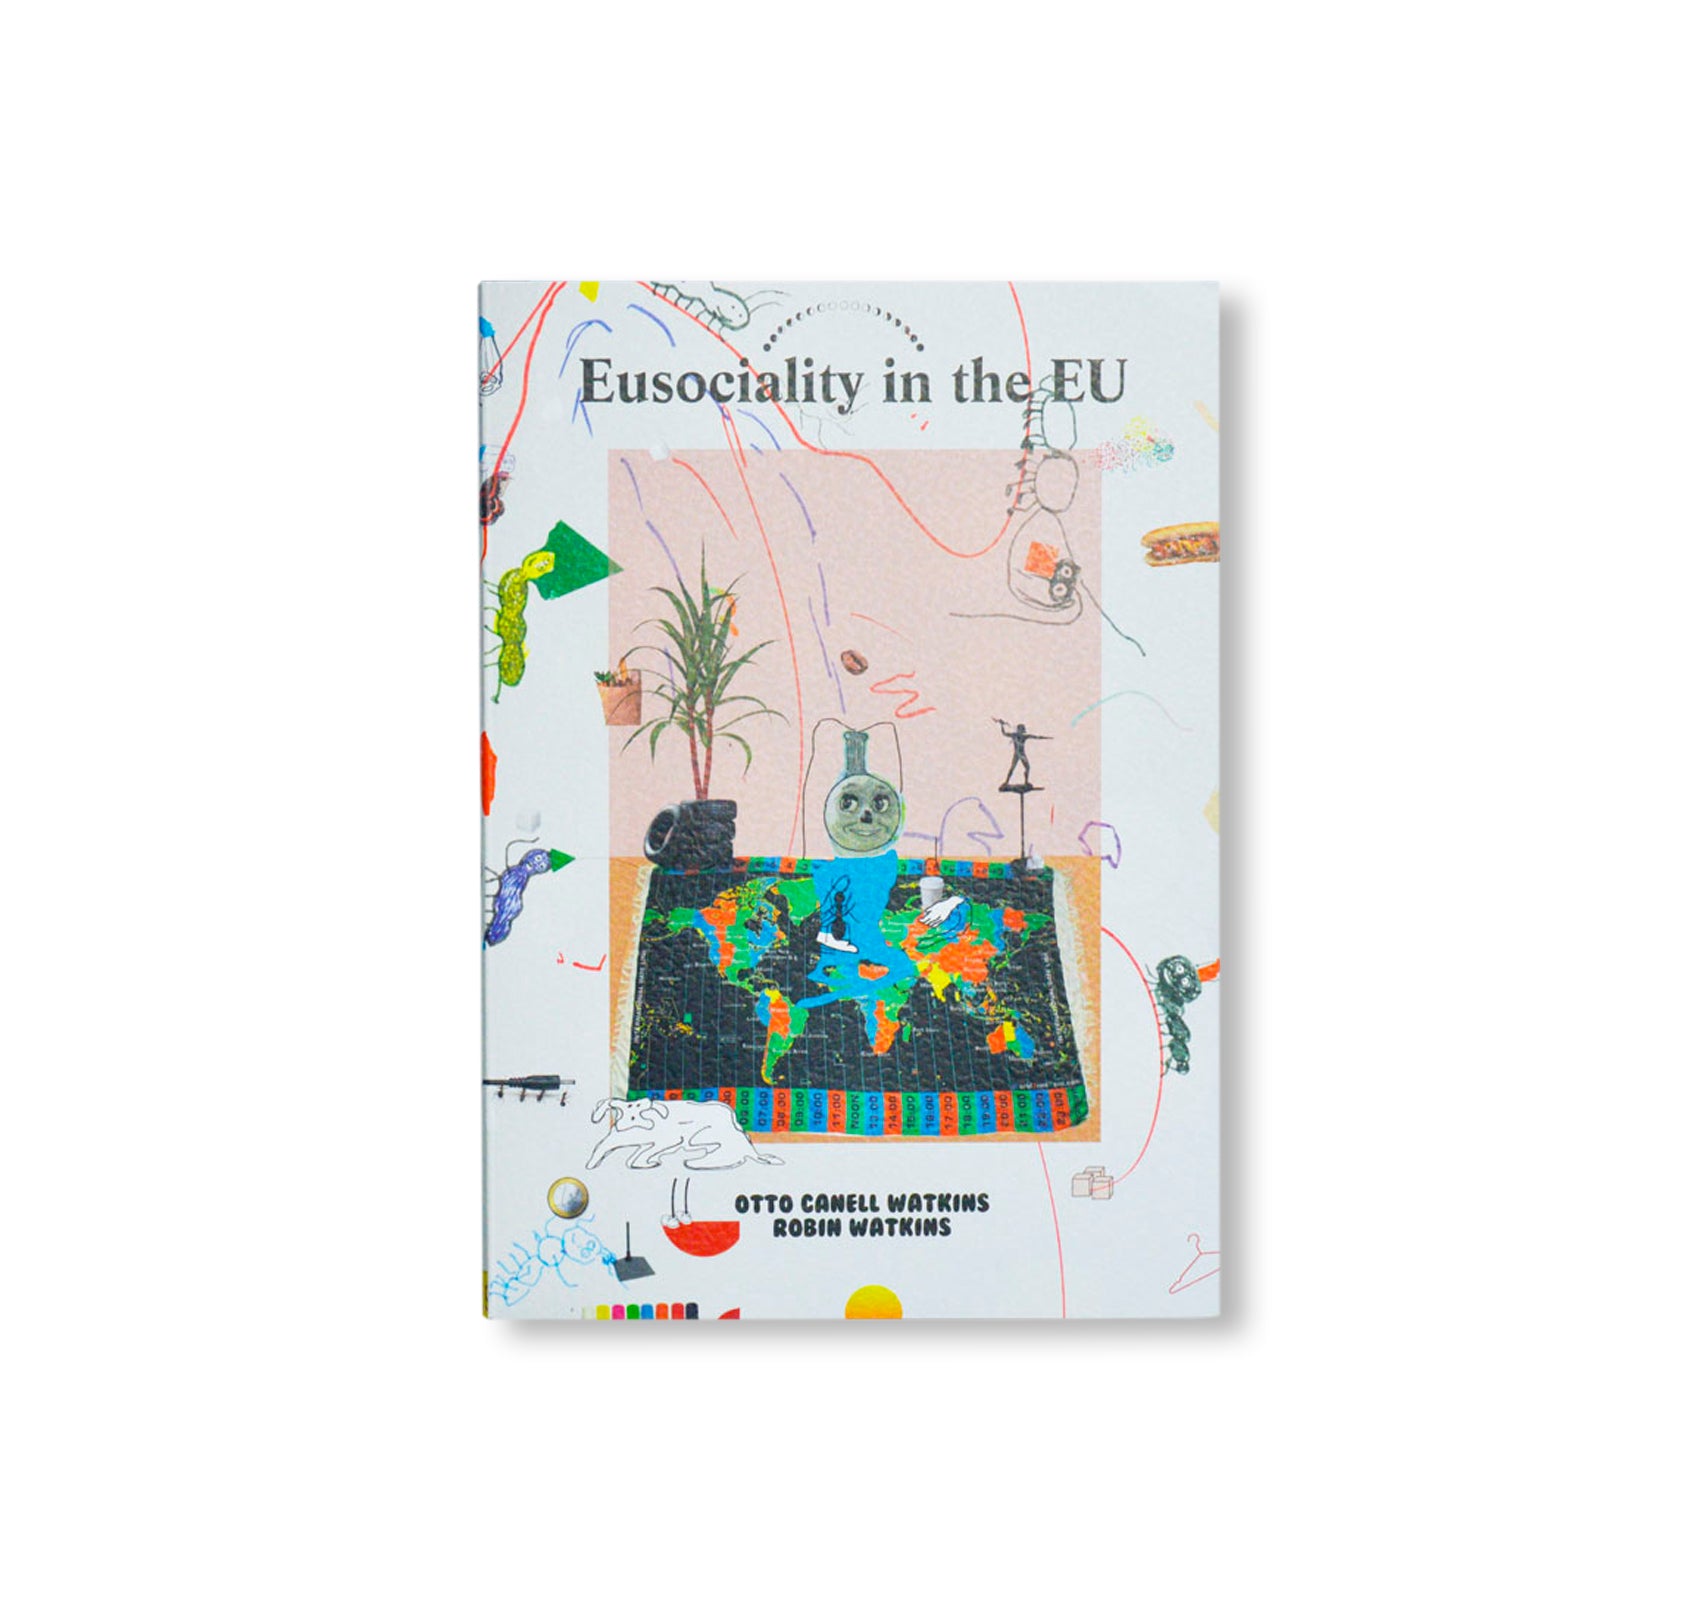 EUSOCIALITY IN THE EU by Otto Canell Watkins, Robin Watkins